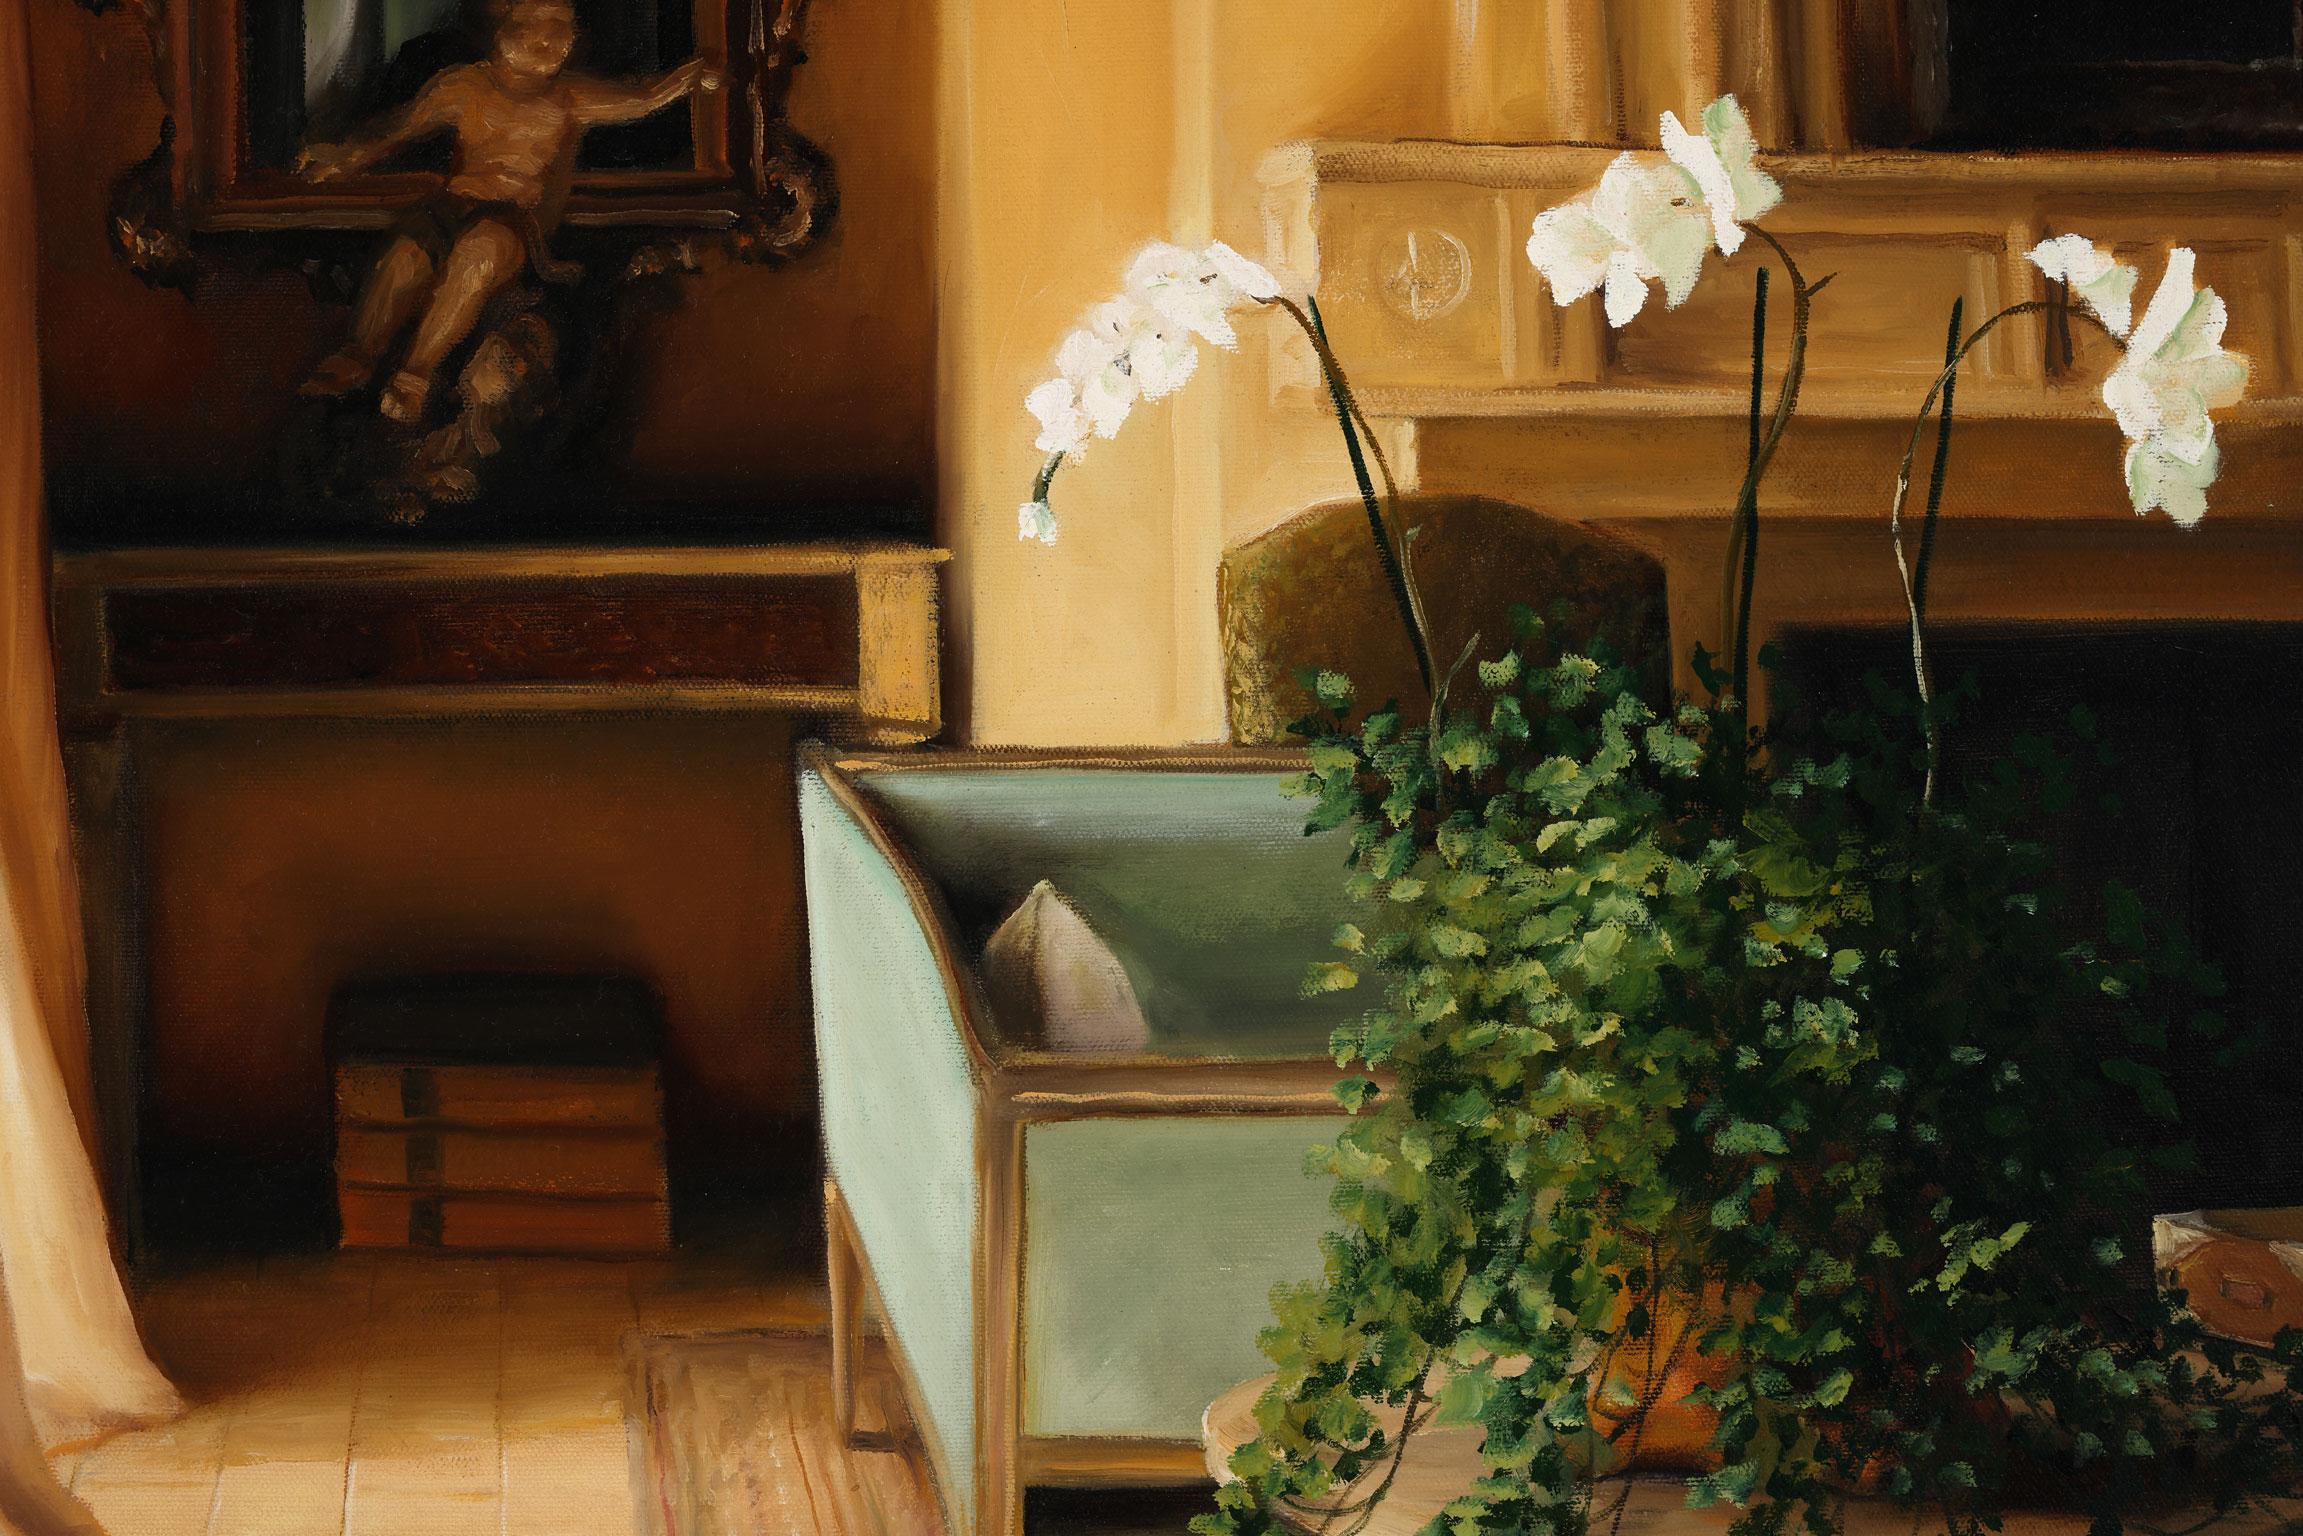 “Interior in Roma,” an original oil on canvas by Robert K. White, is a piece for the true collector. White’s careful attention to detail and vivid use of browns project from the painting, immediately capturing the viewer's attention and highlighting